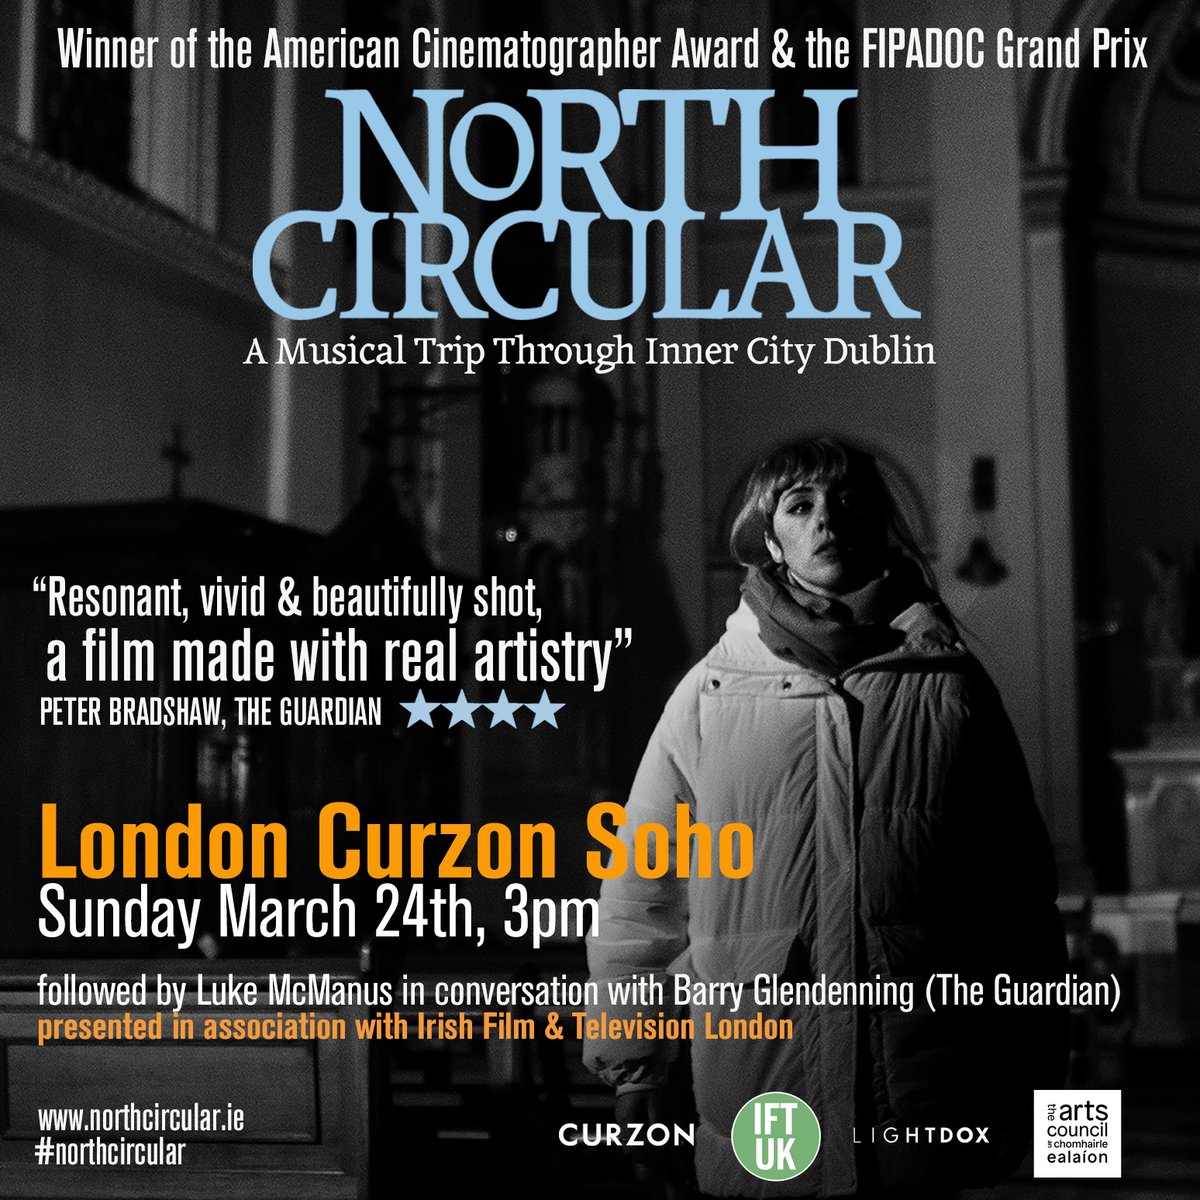 #NorthCircular is back in London this Sunday at 3pm followed by a chat between @bglendenning and director @lukemcmanus at the lovely @CurzonSoho Tickets are selling fast for this one - dont miss out curzon.com/ticketing/seat…